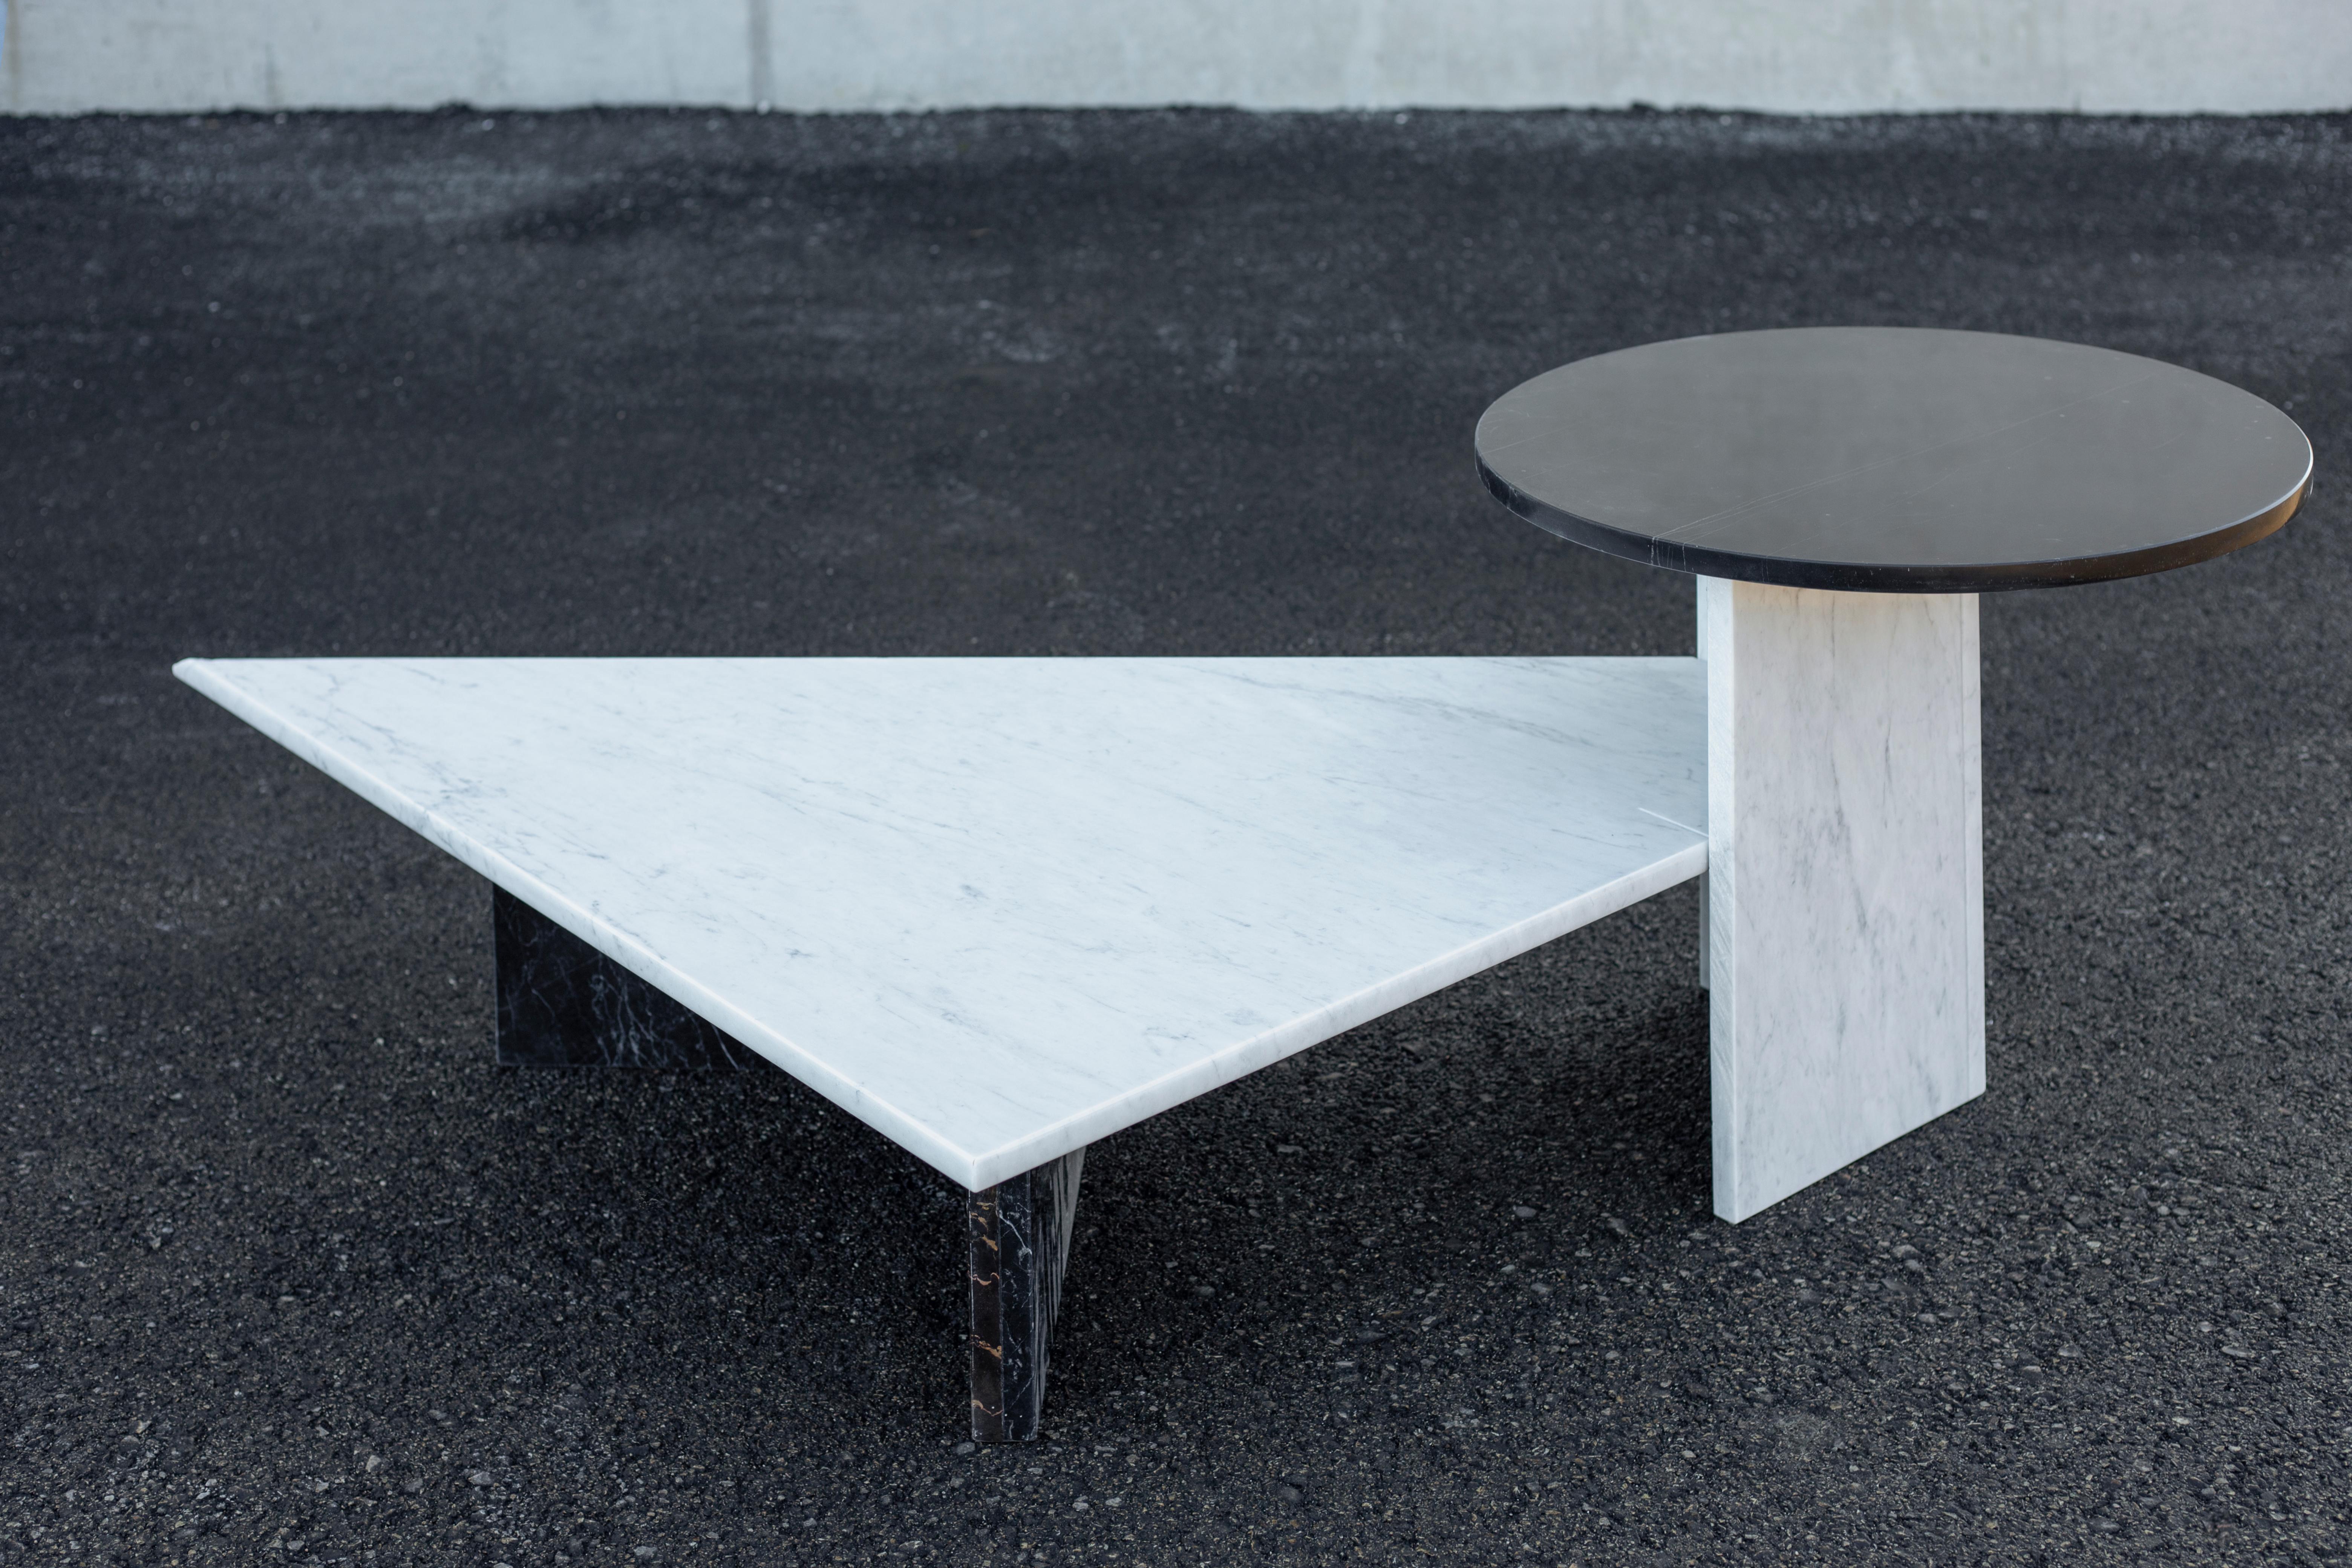 SST014 coffee table by Stone Stackers
Dimensions: D 162 x W 89 x H 48 cm
Materials: Marbles:
Marble top corner: Marquina
Marble structure: Carrara Marquina
Marble top: Marquina
Weight: 79 kg

An appealing geometrical tabletop combined with a